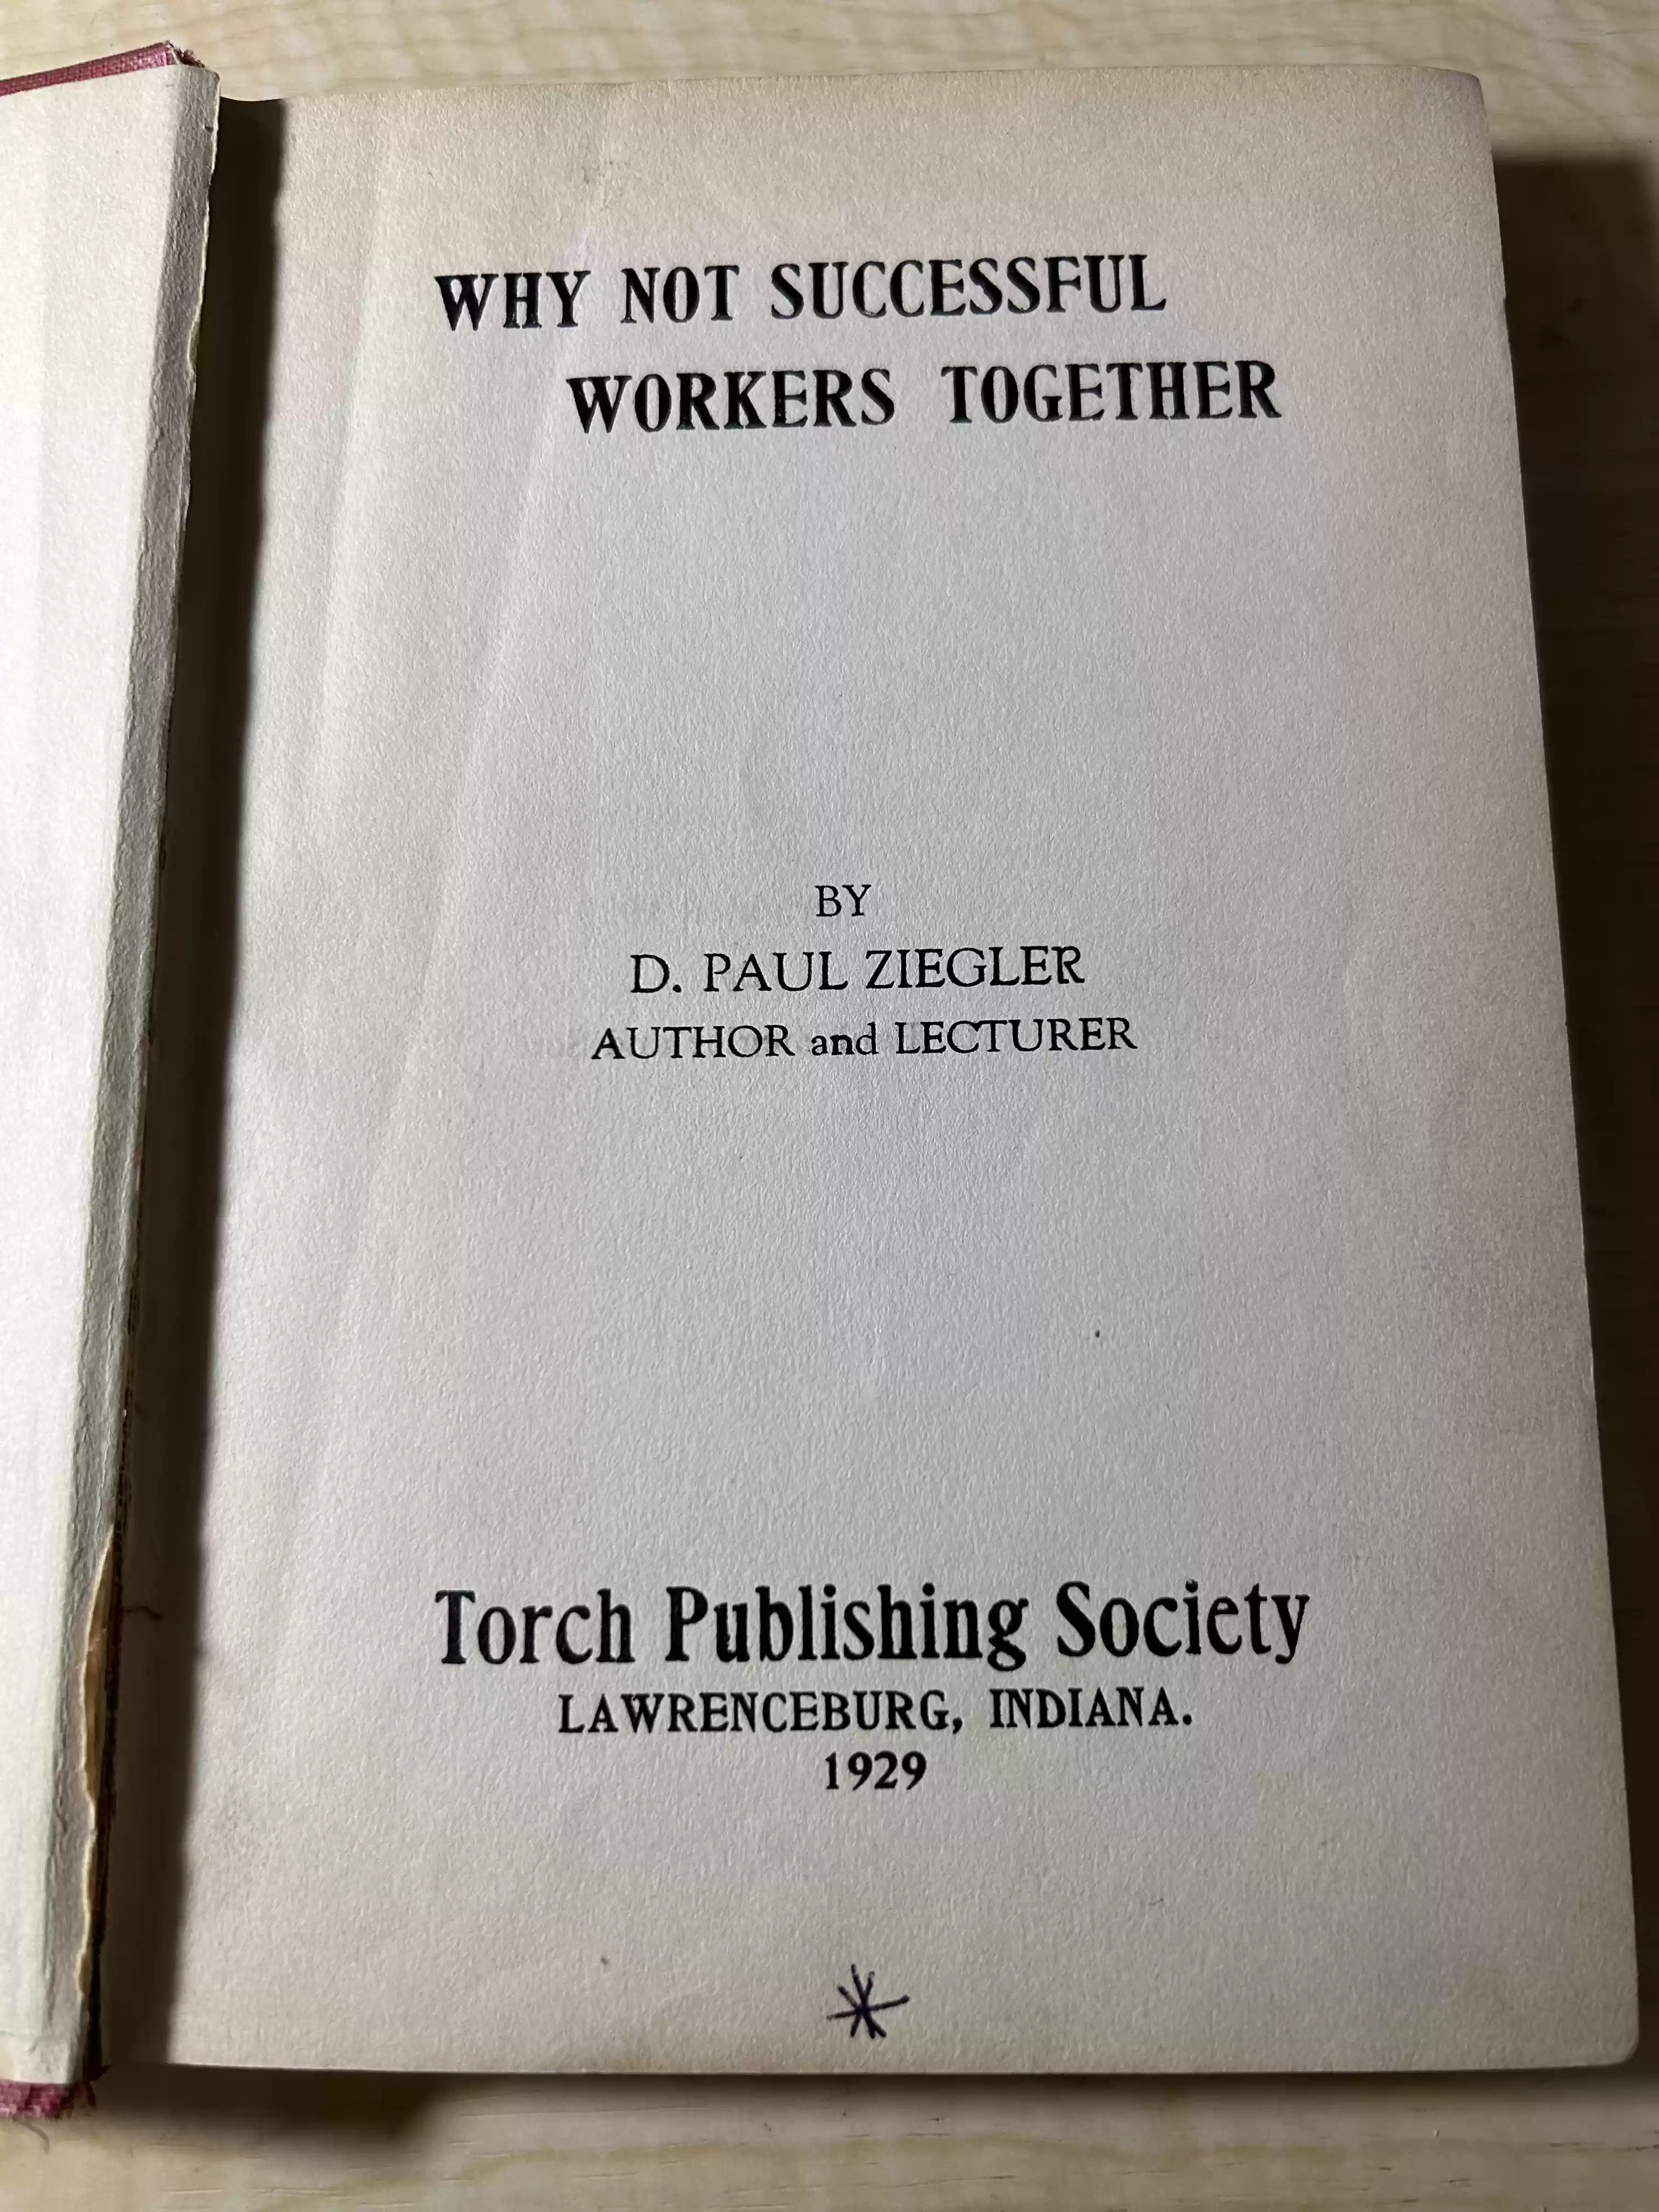 Why not succesful workers togethe-inside cover